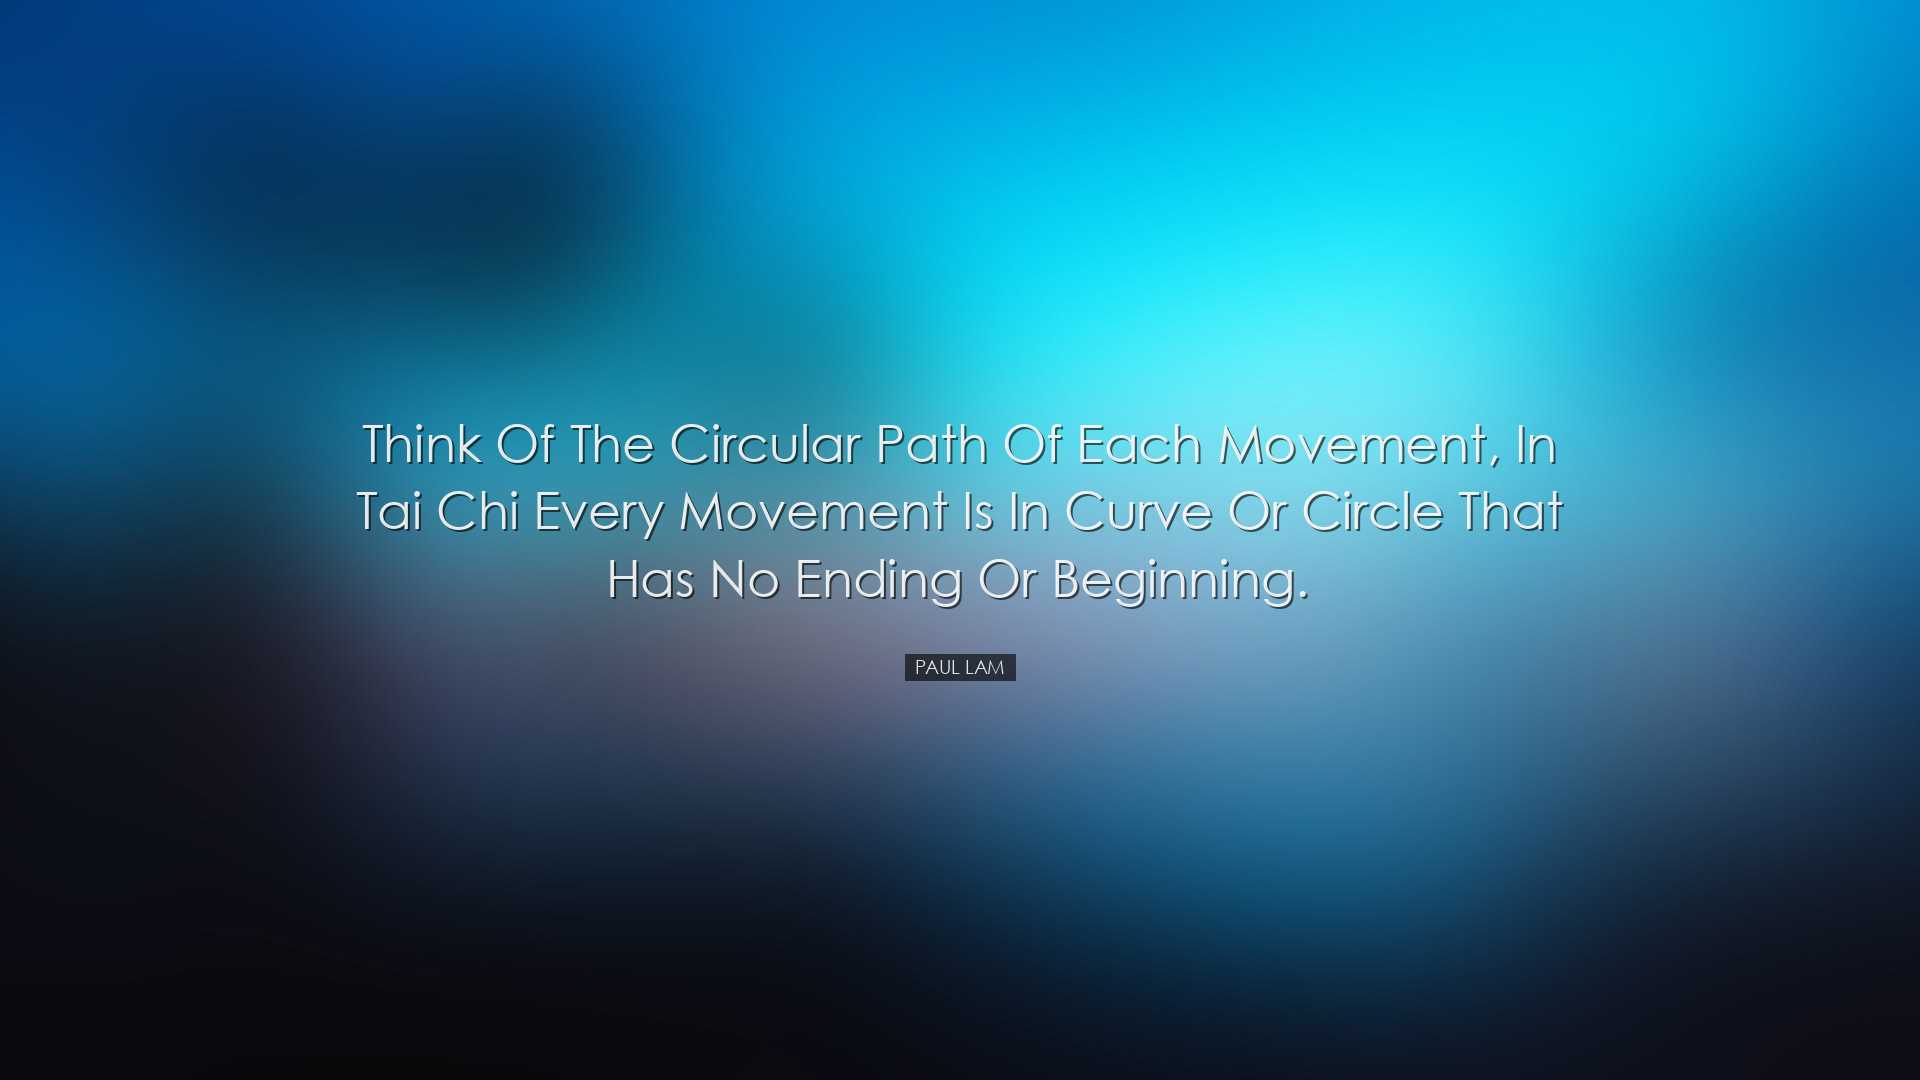 Think of the circular path of each movement, in Tai Chi every move